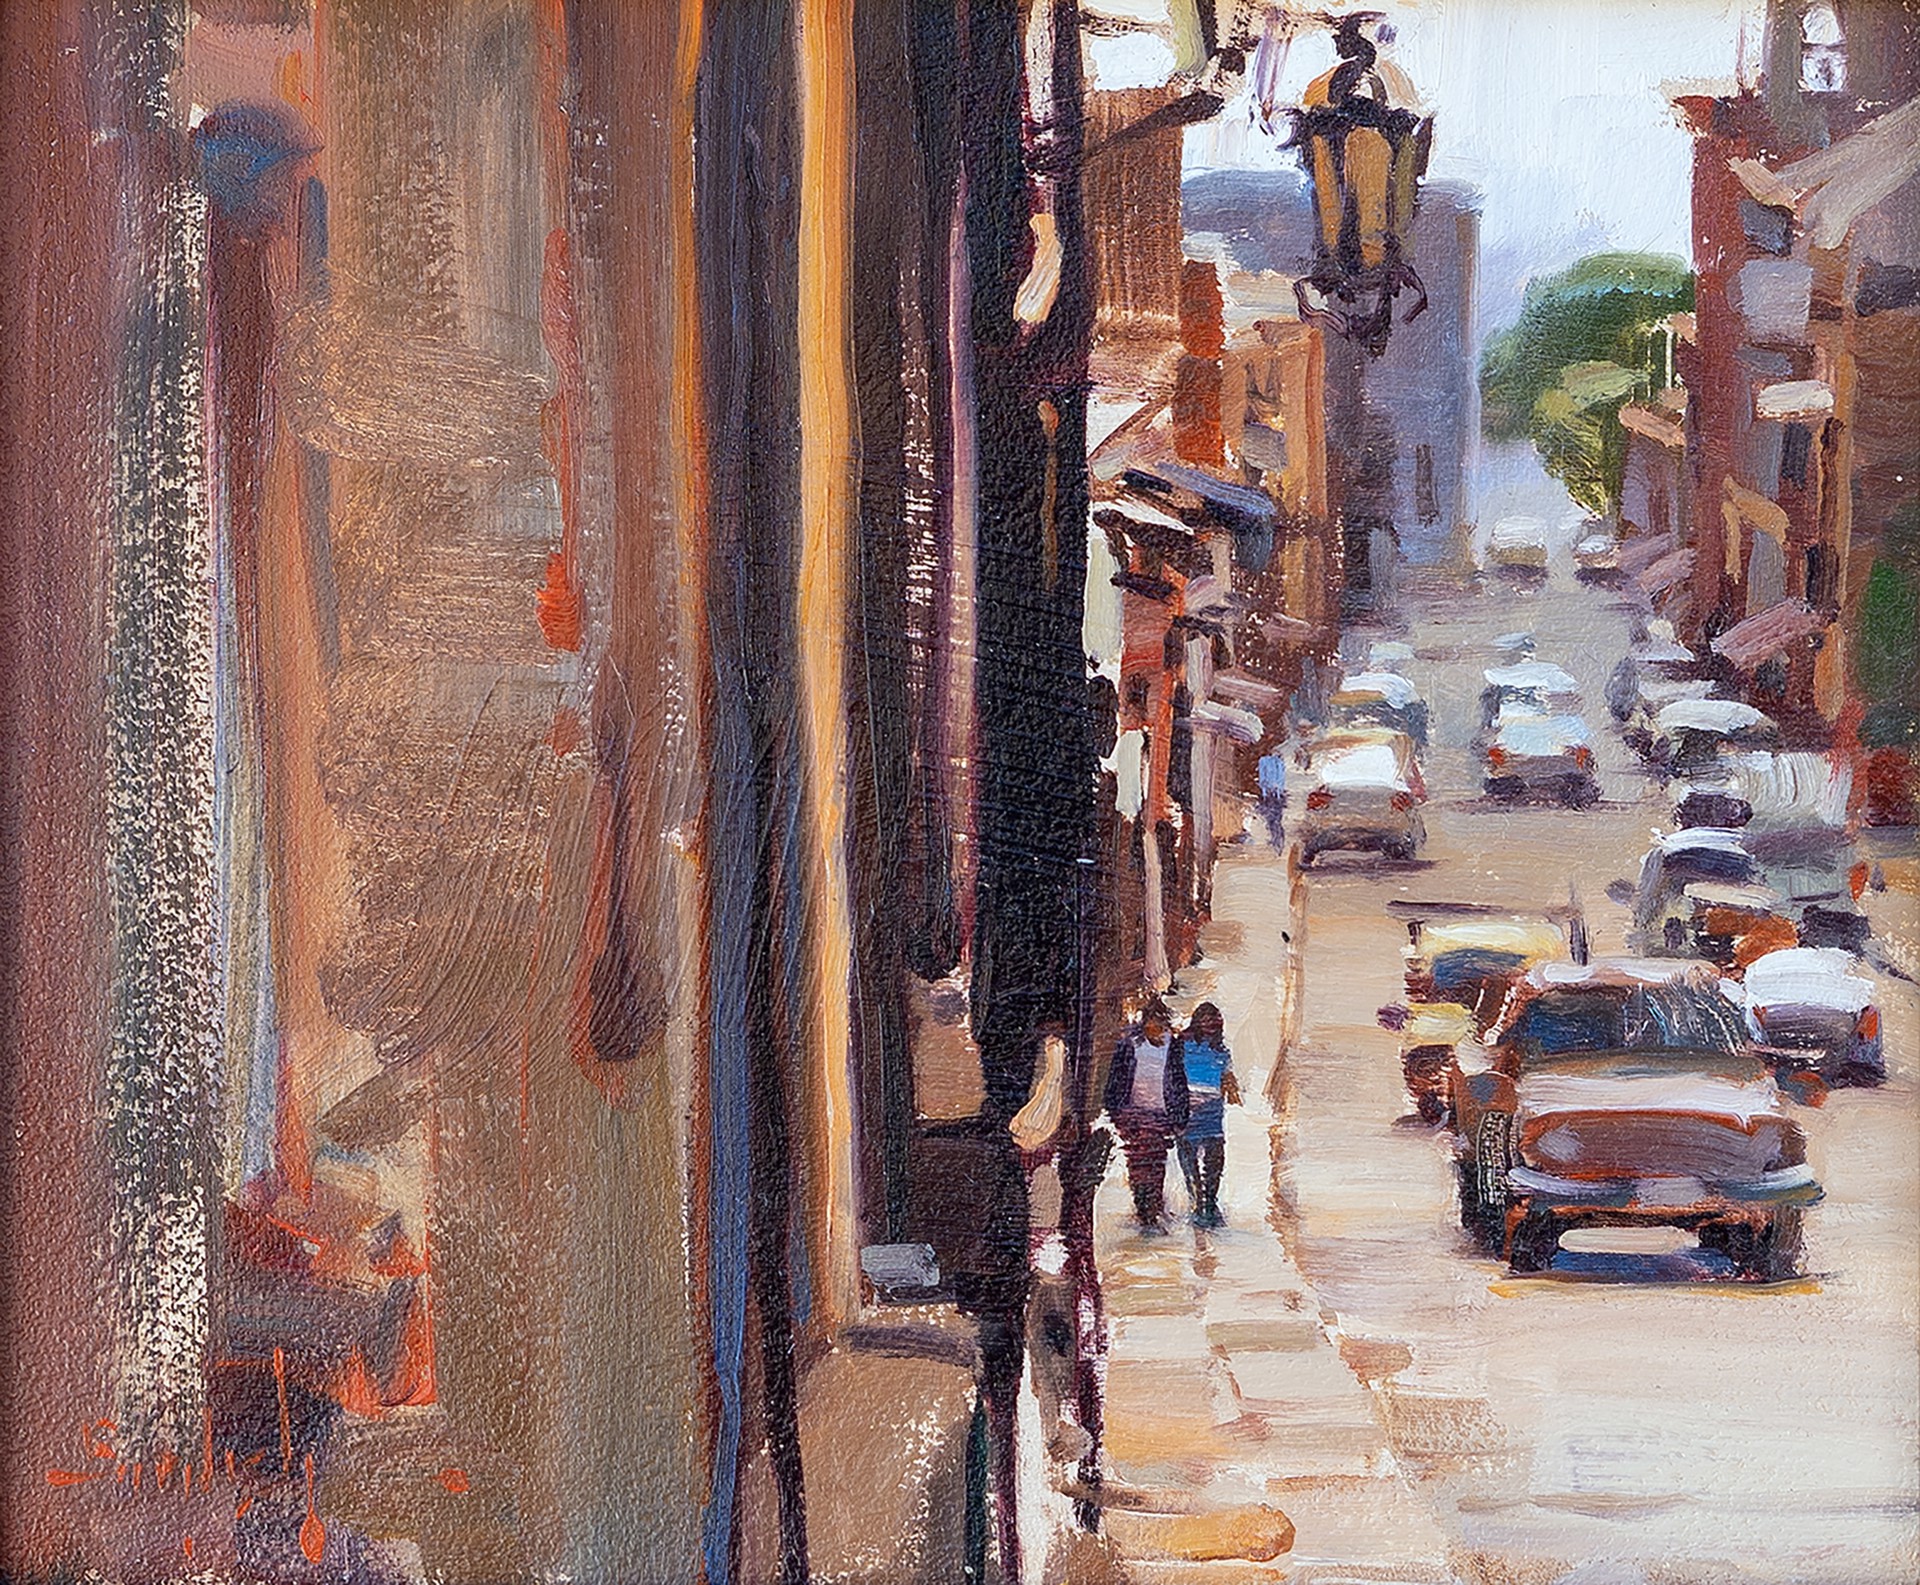 San Francisco St. in San Miguel by Kim English